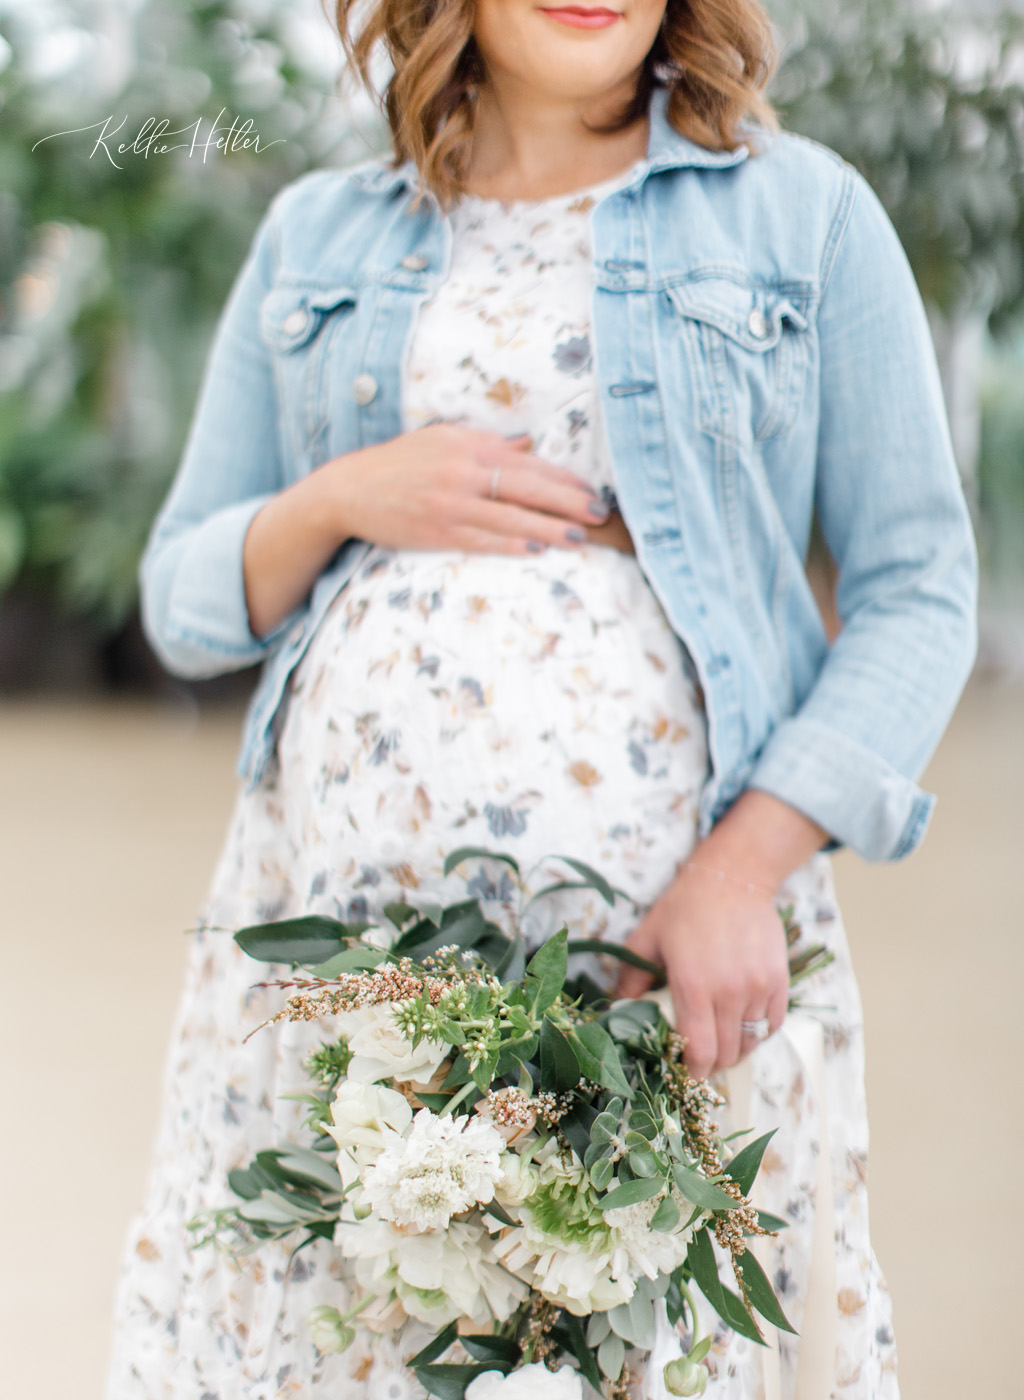 Grand Rapids maternity session at the Downtown Market greenhouse